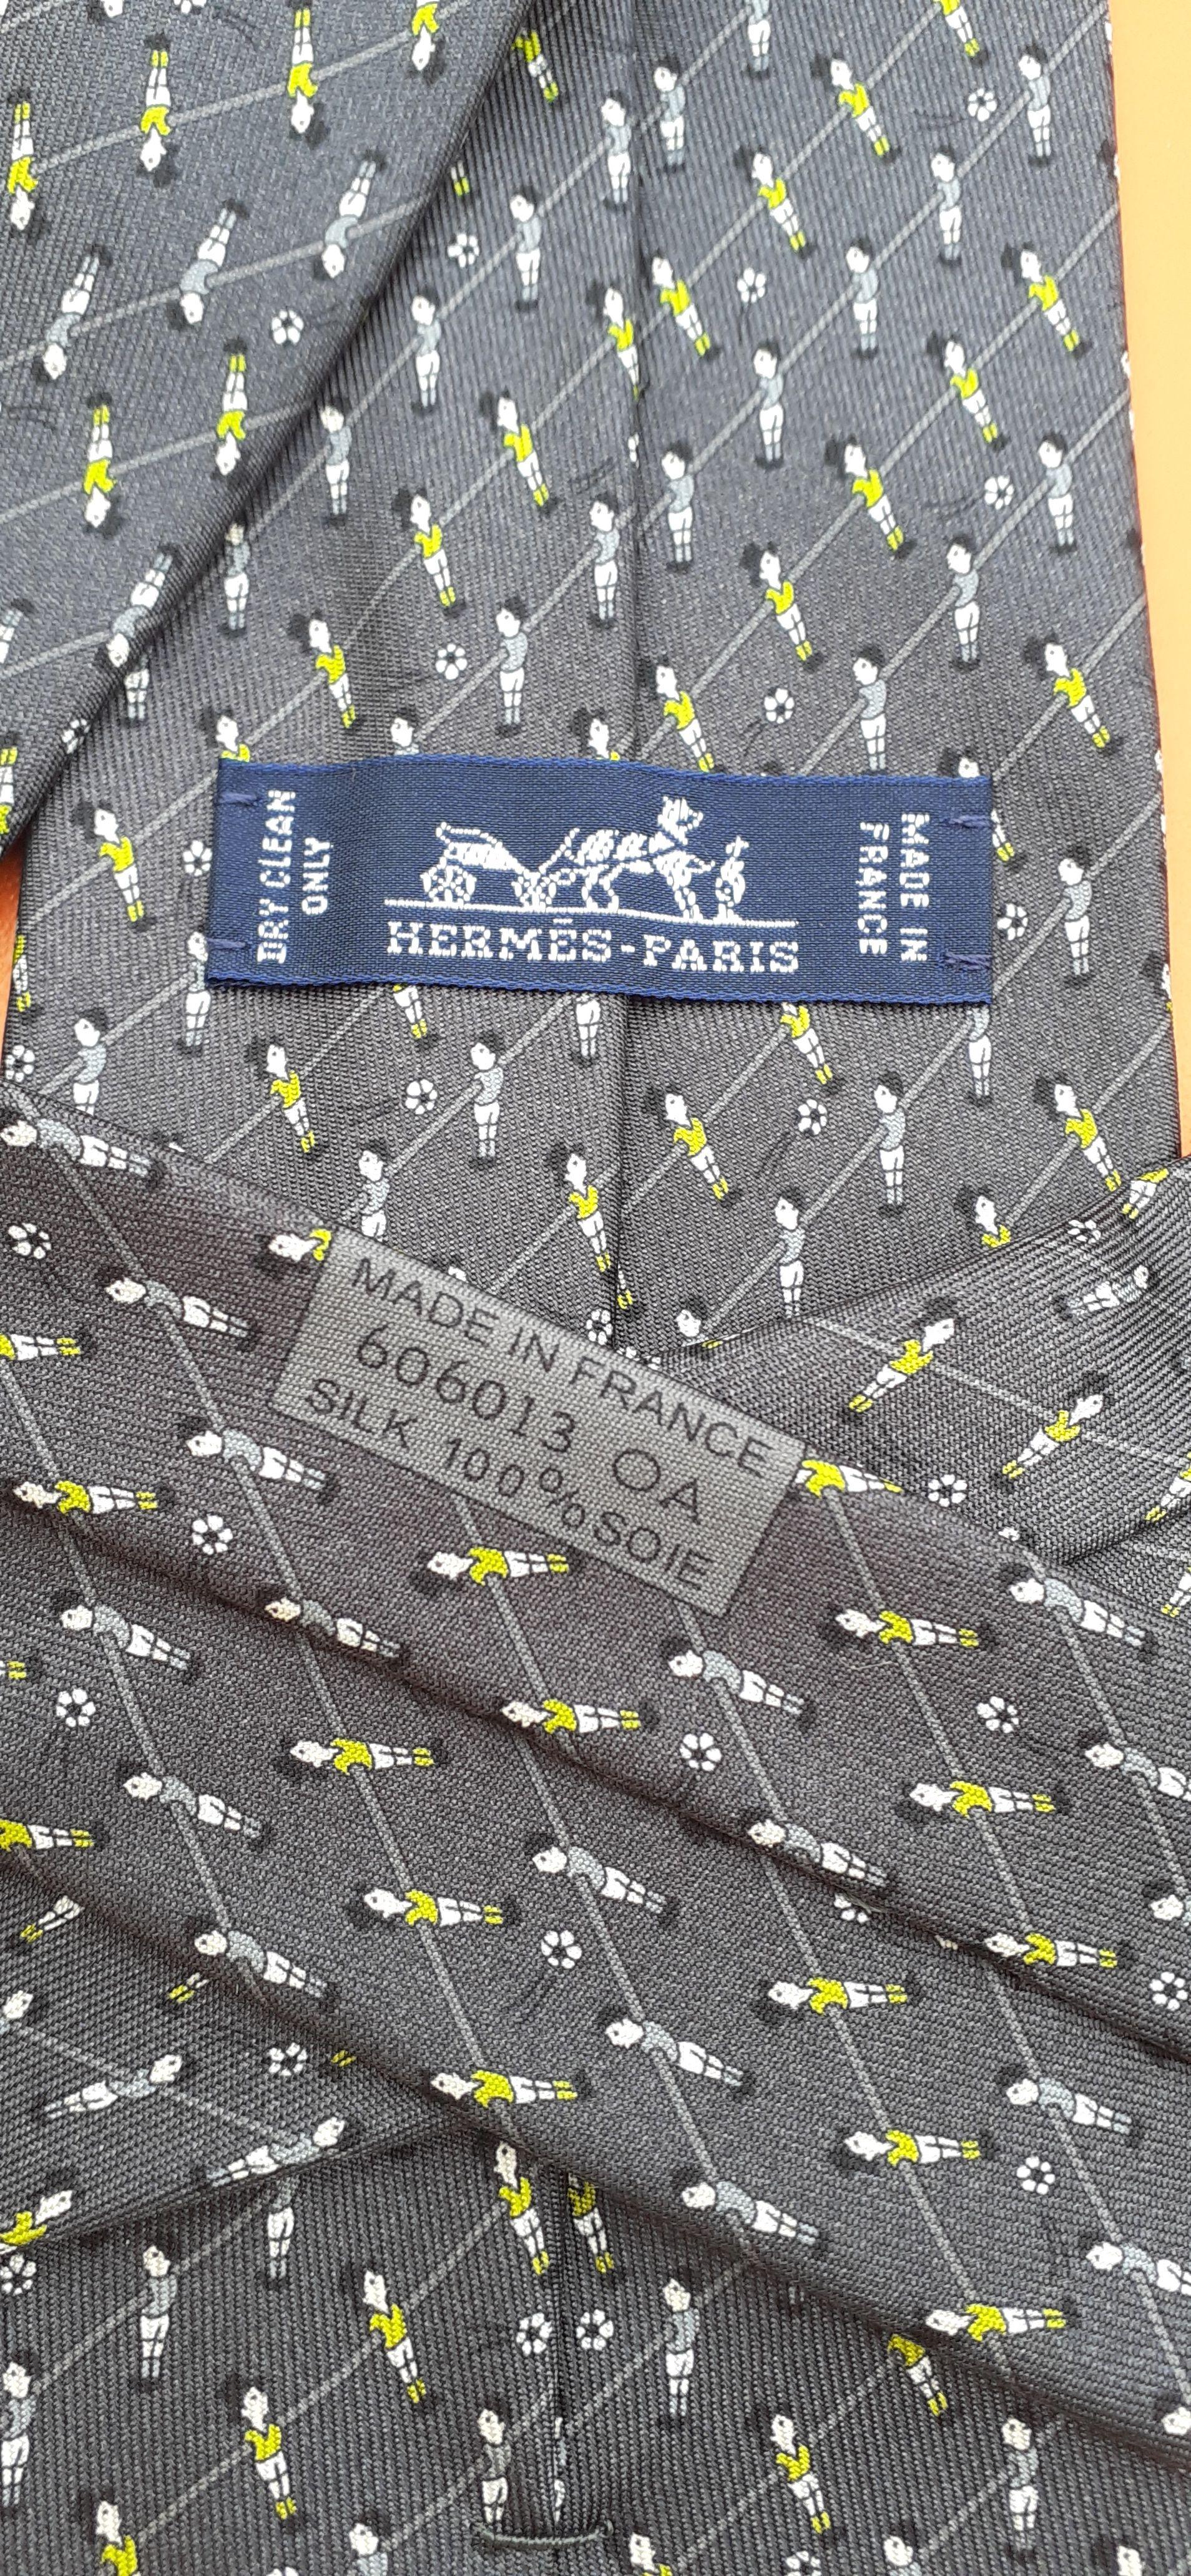 Rare Hermès Tie Baby Foot Table Soccer Print in Silk For Sale 9